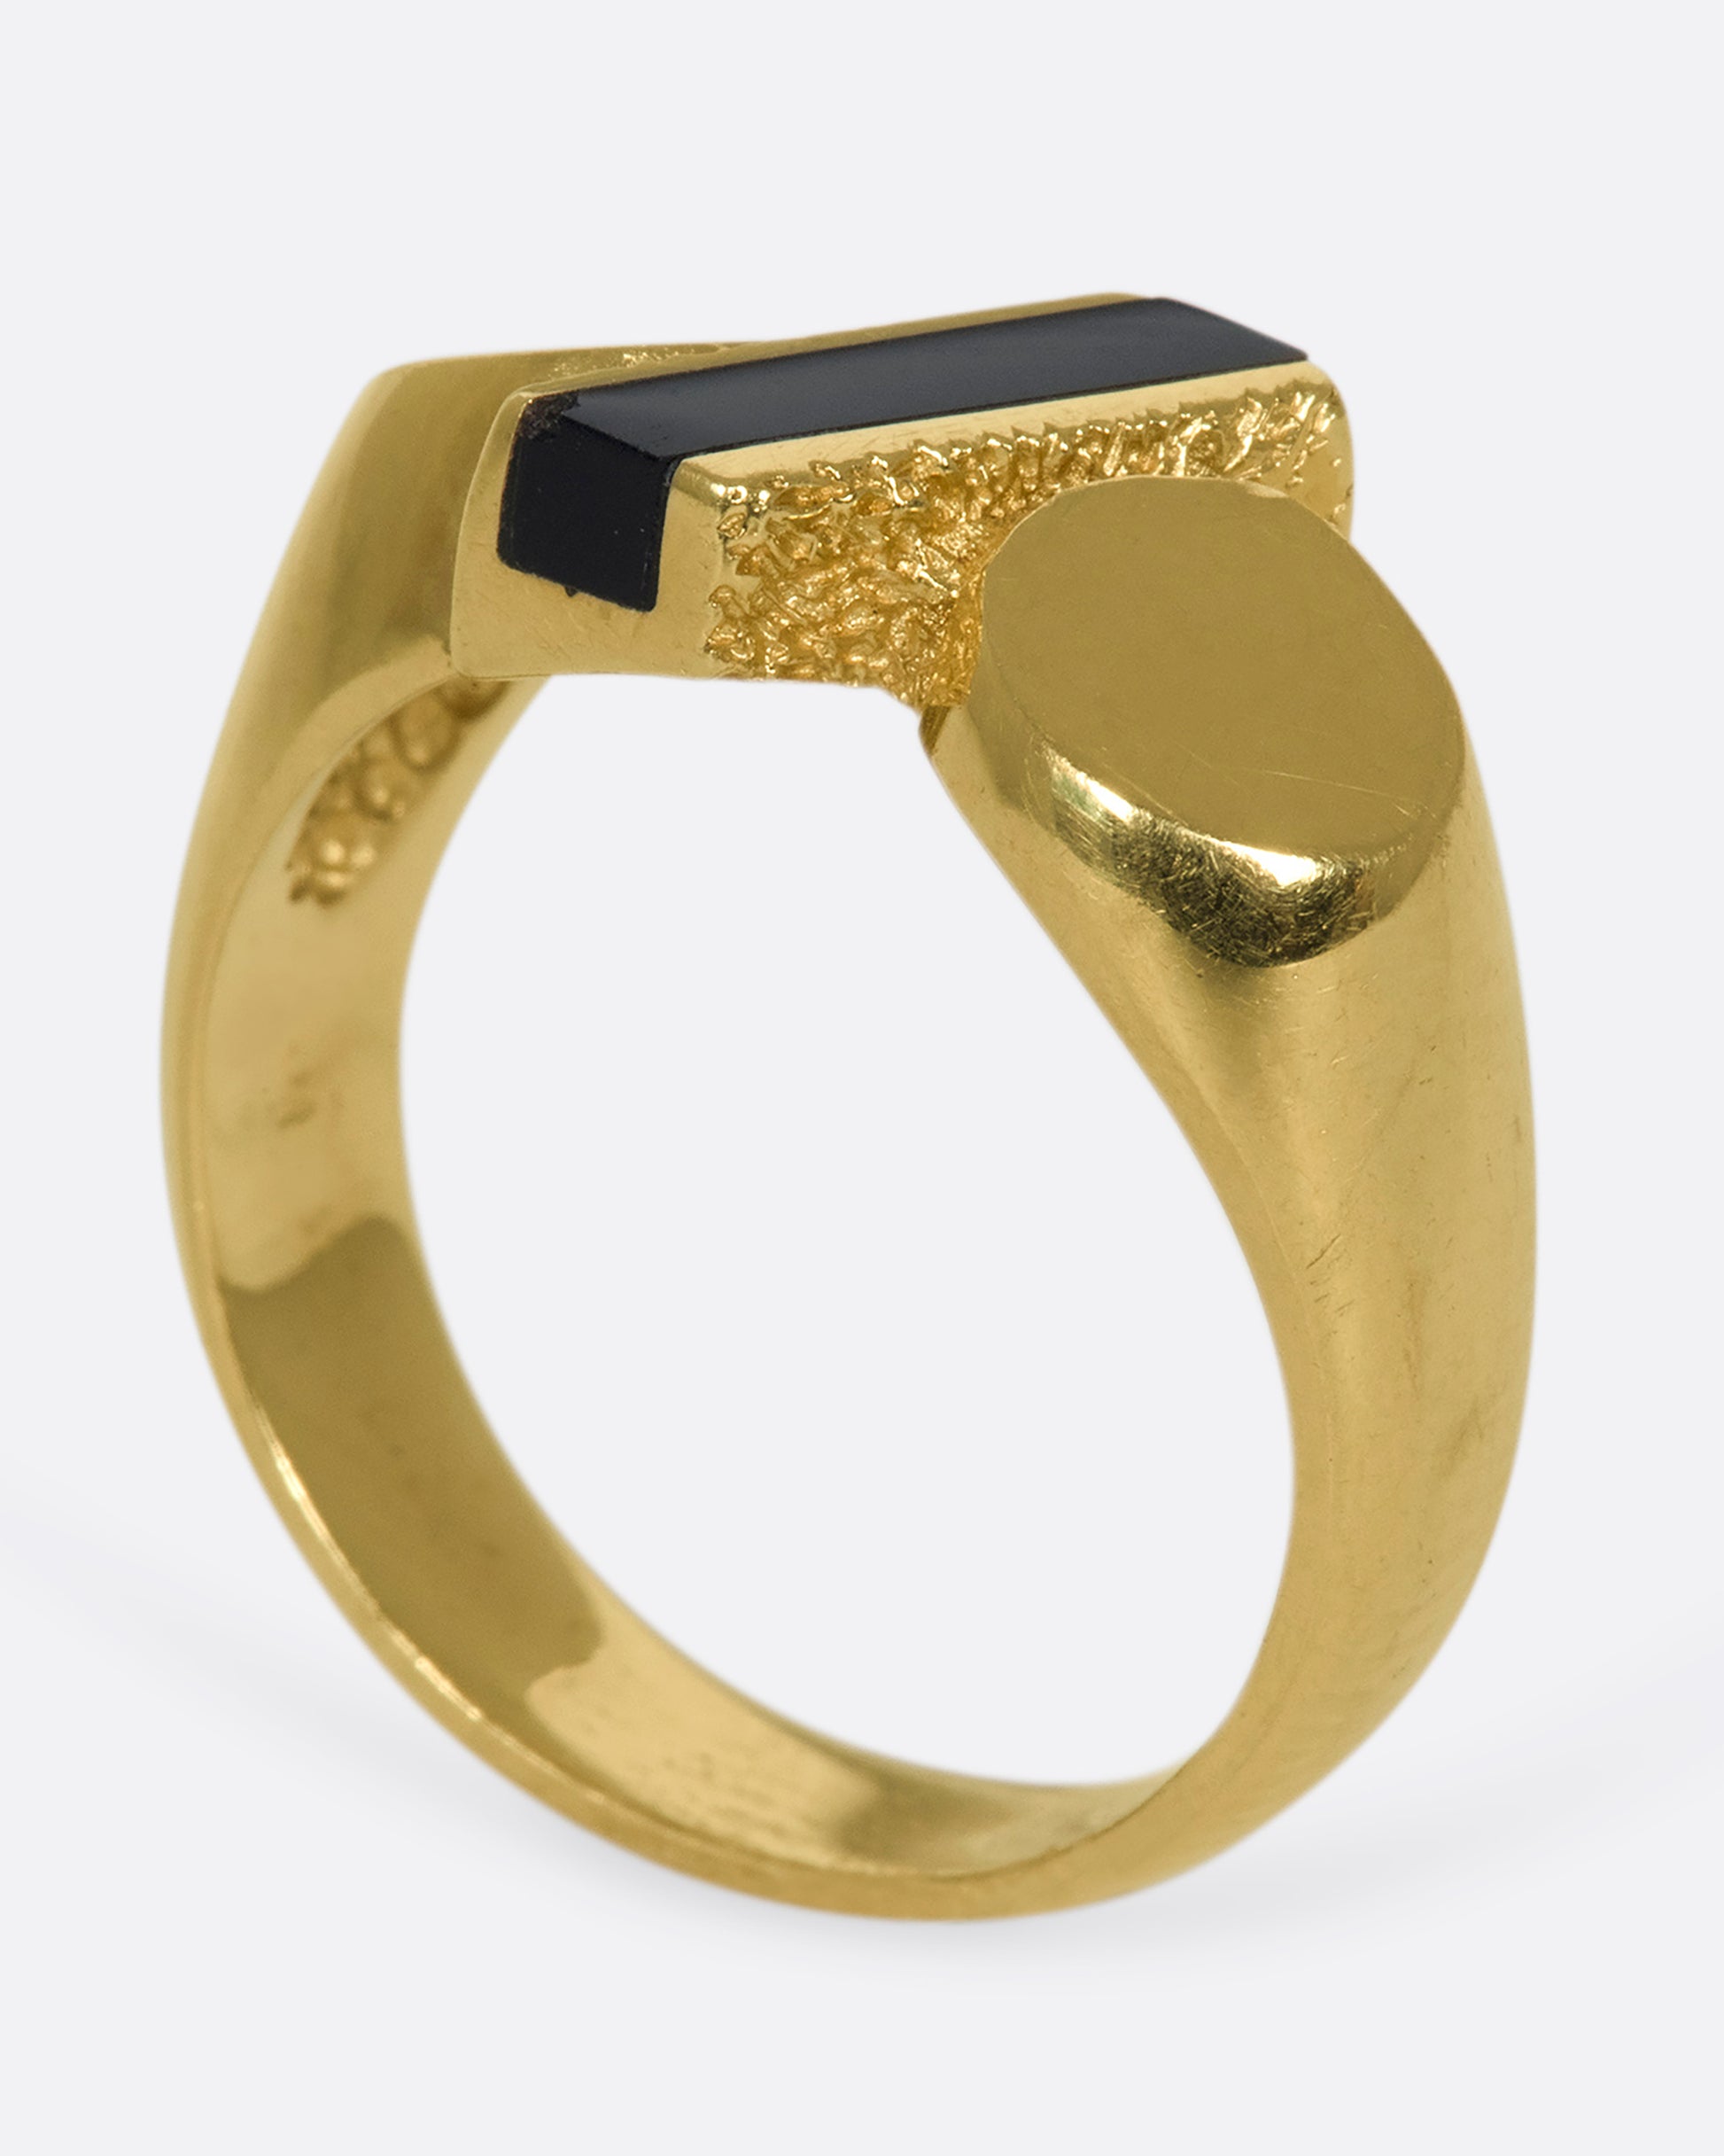 A vintage 14k gold puffy, rounded band with flat ends and a slice of onyx popping through the center